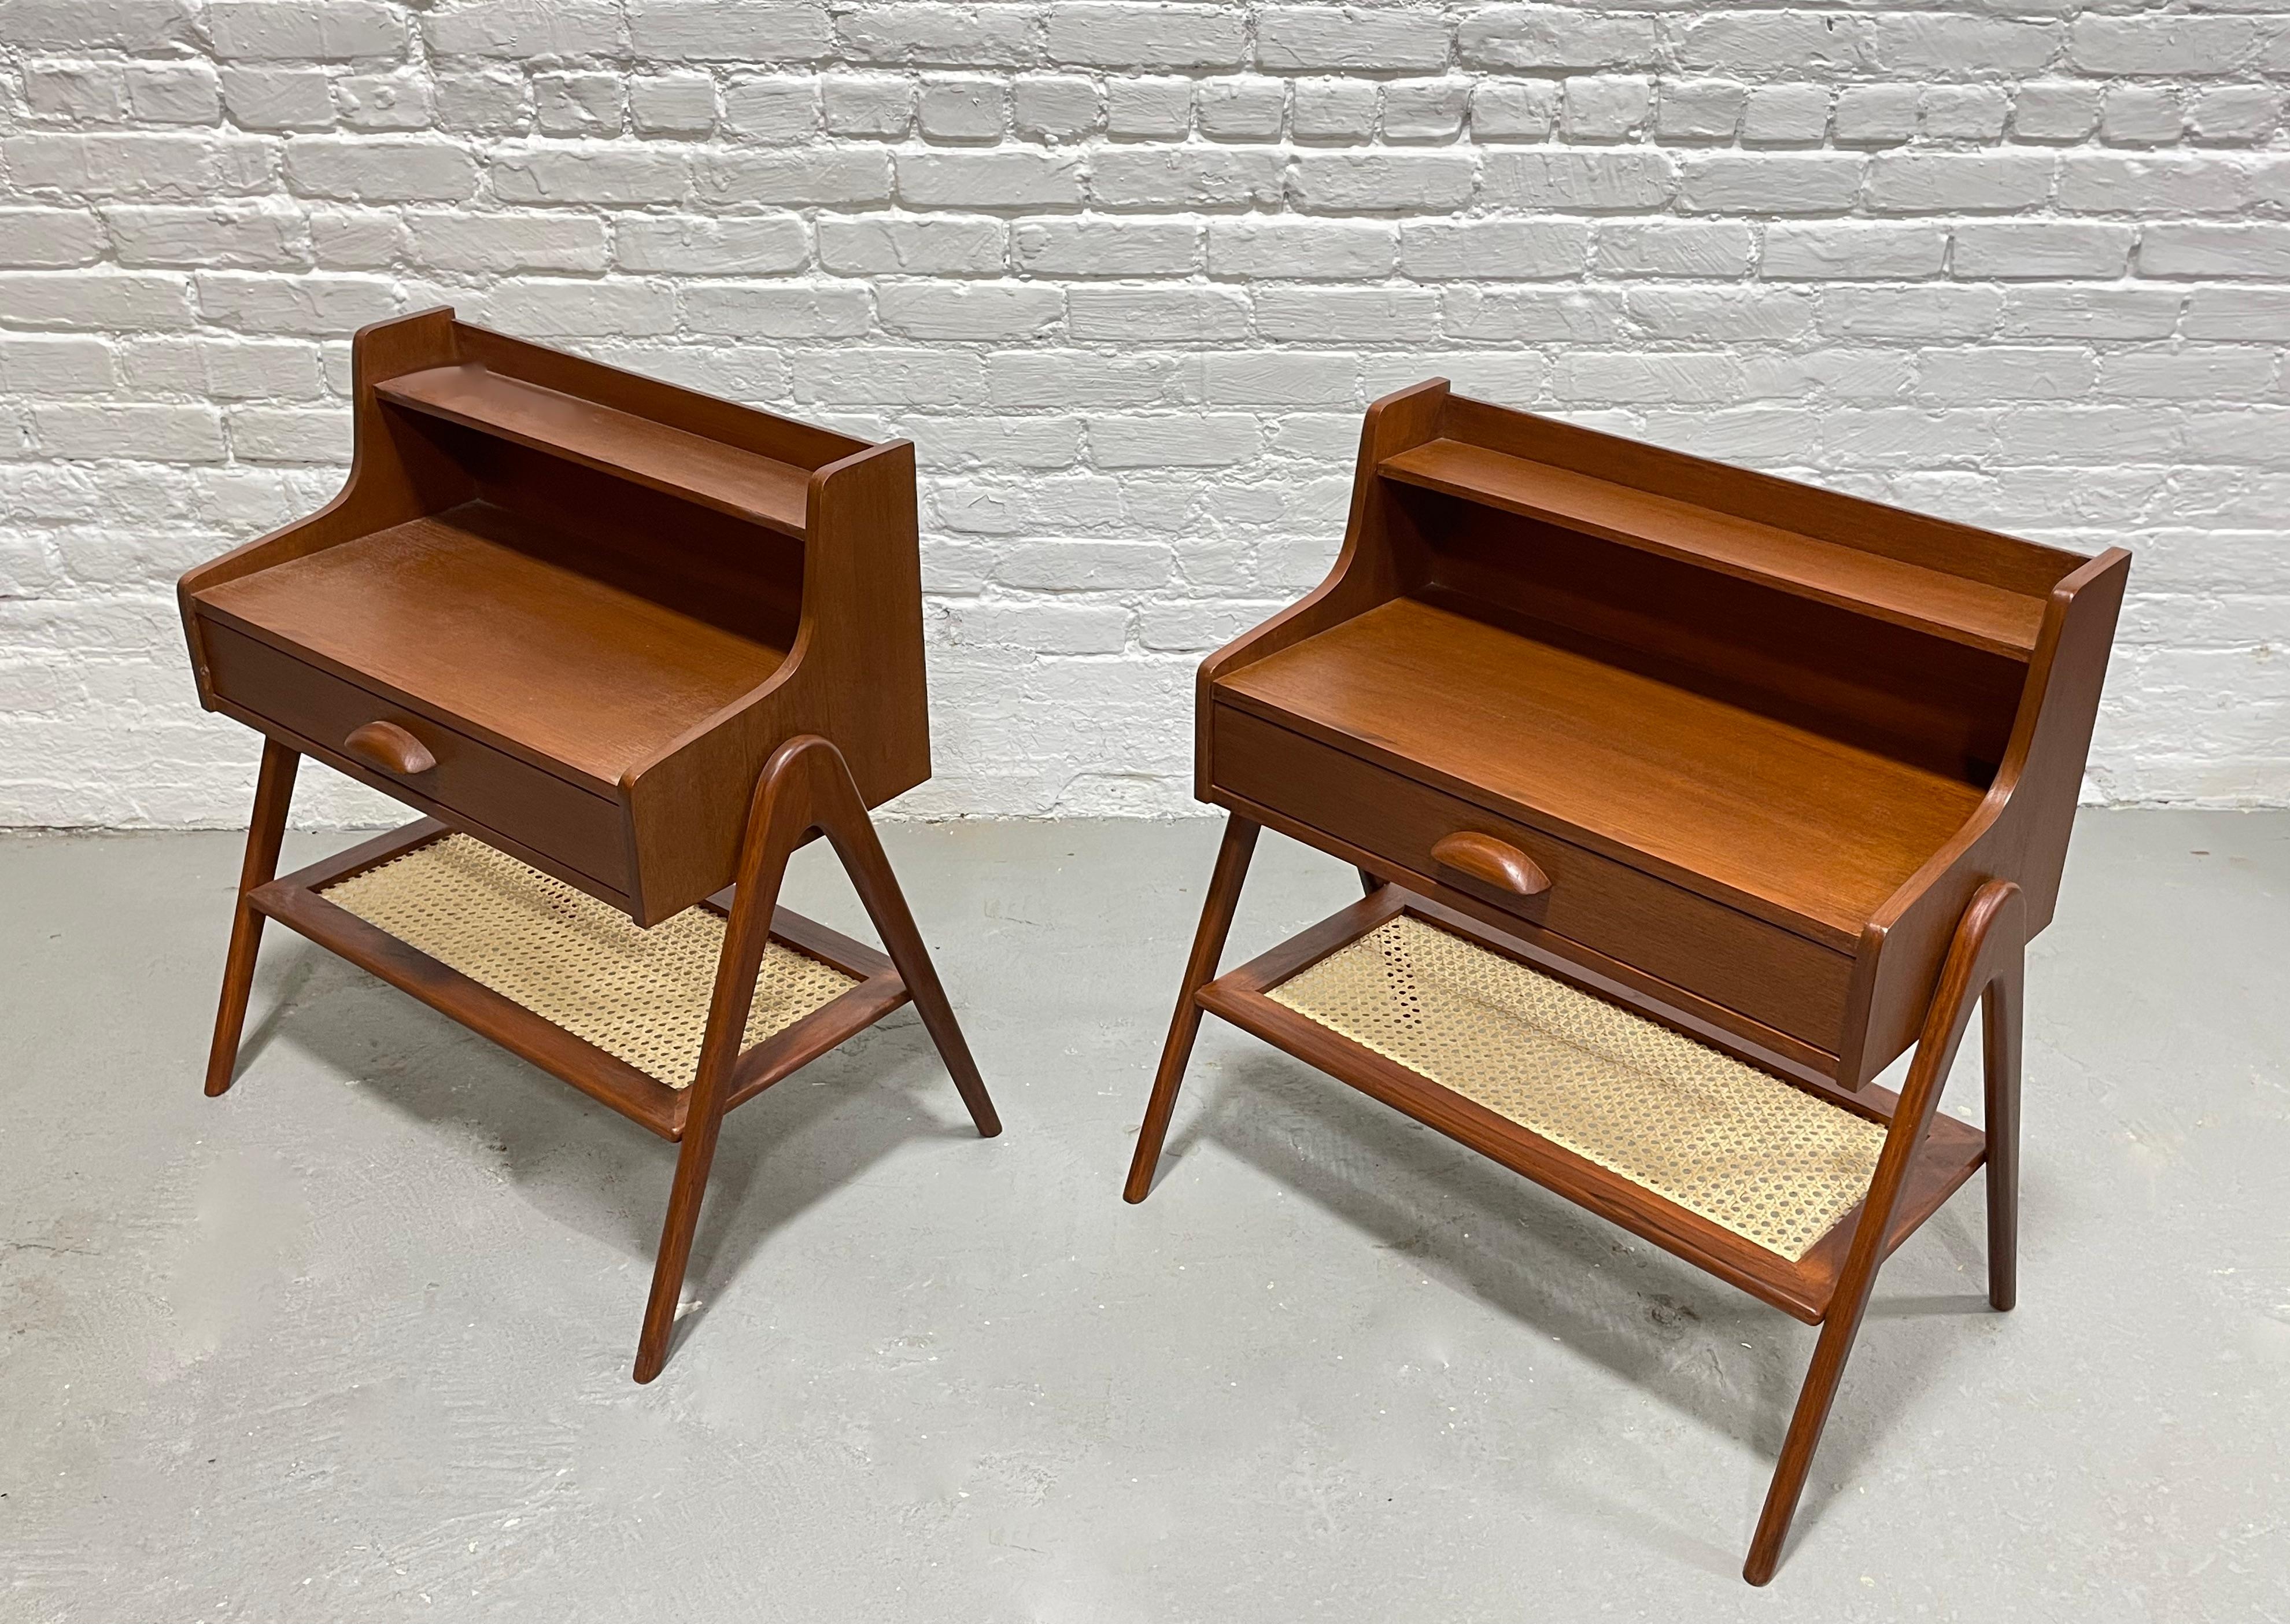 Pair of Mid-Century Modern Handcrafted Caned Teak Cabinets / Entryway Tables For Sale 2